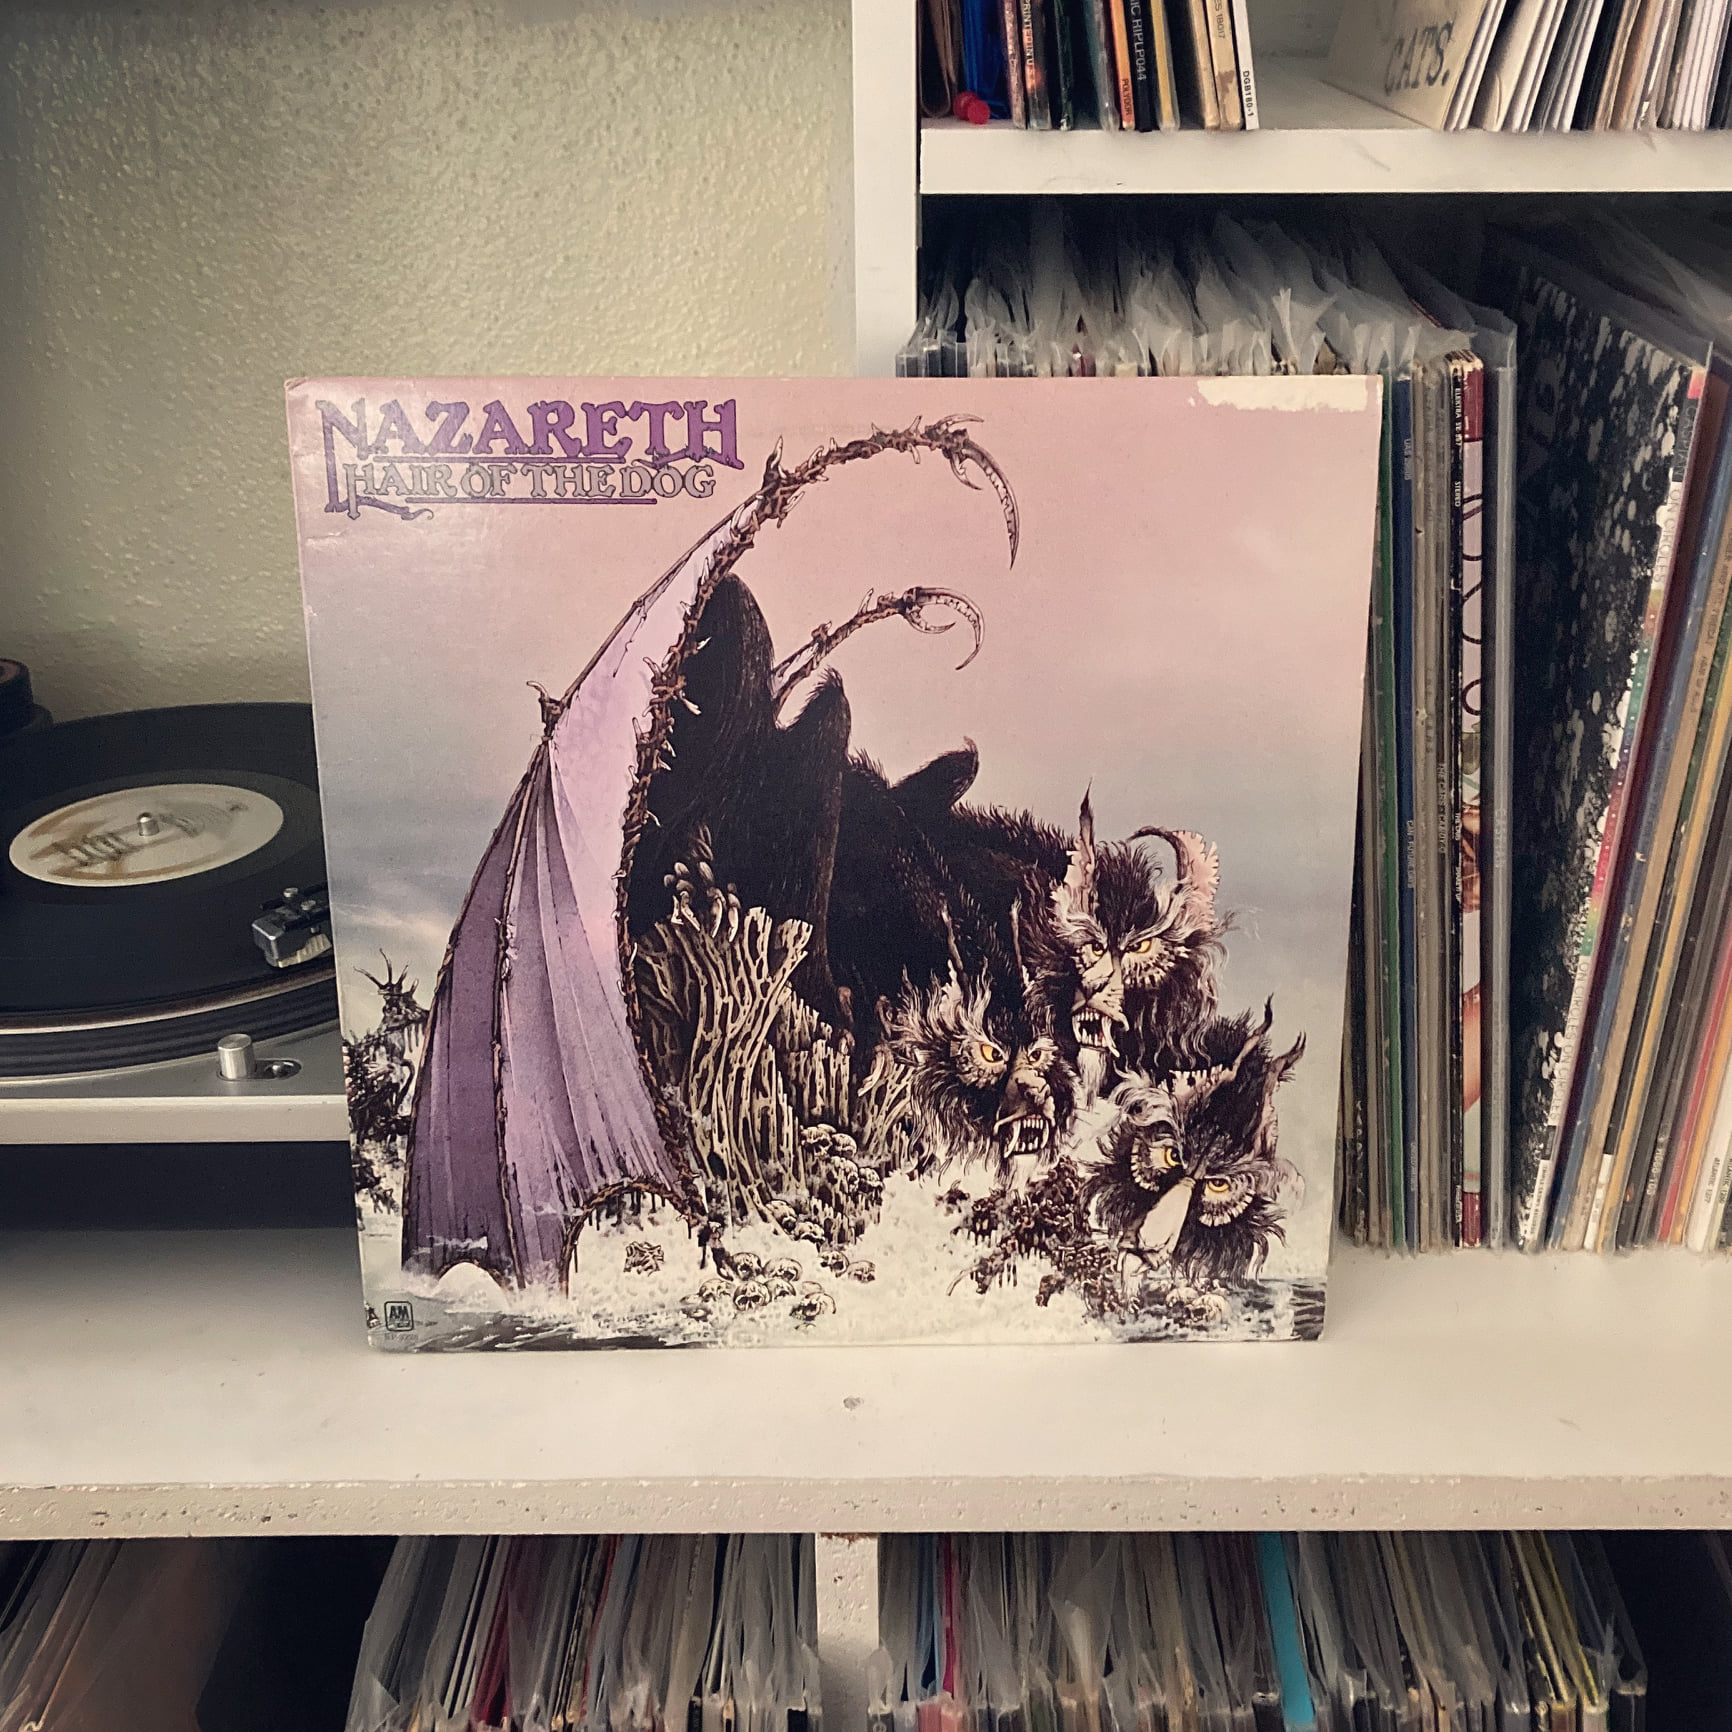 Record #702: Nazareth - Hair of the Dog (1975) - A Year of Vinyl